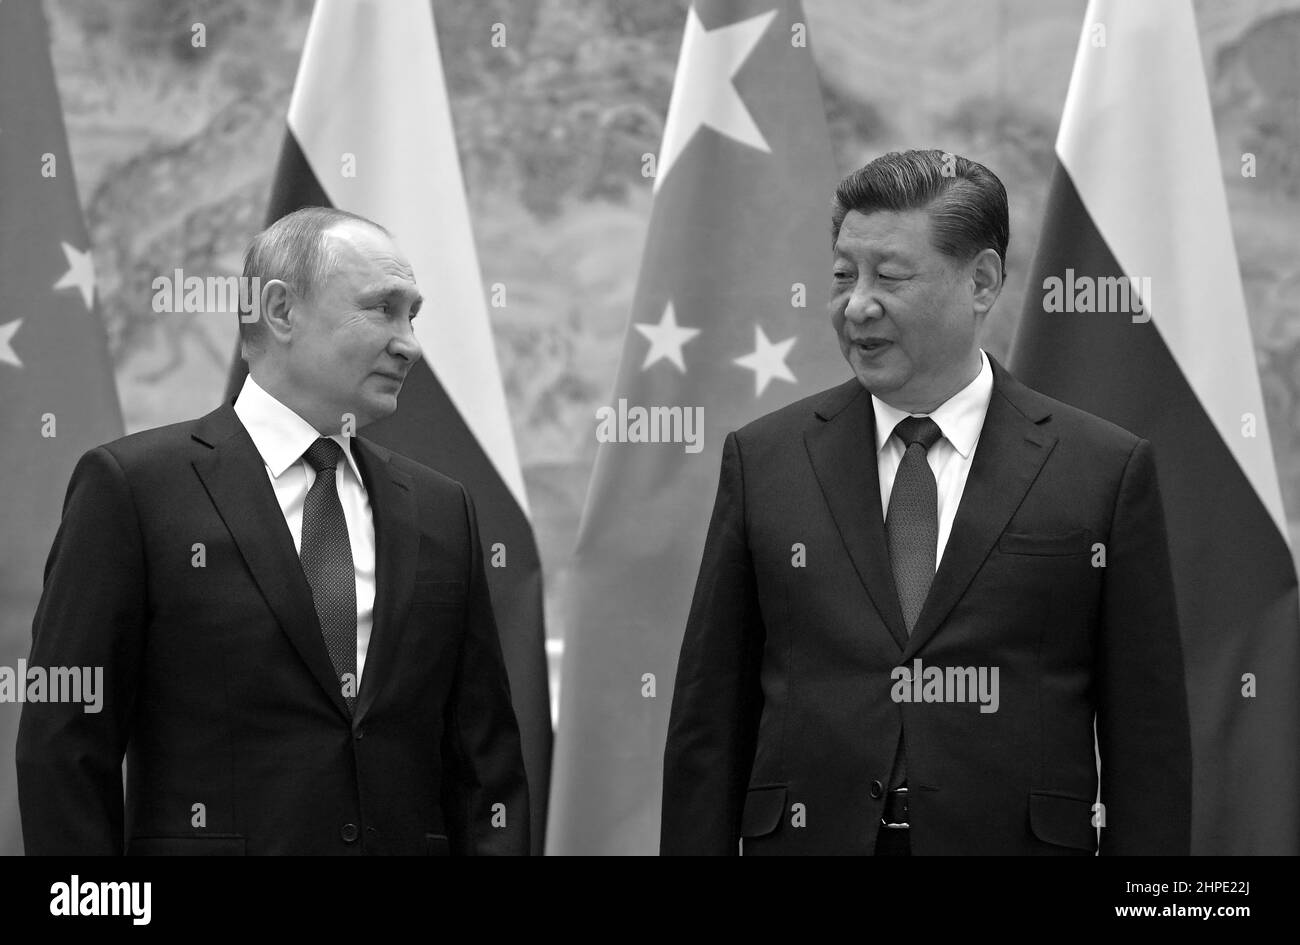 Russian President Vladimir Putin (left) meeting with President of China Xi Jinping at the opening of the Beijing 2022 Winter Olympics. Stock Photo